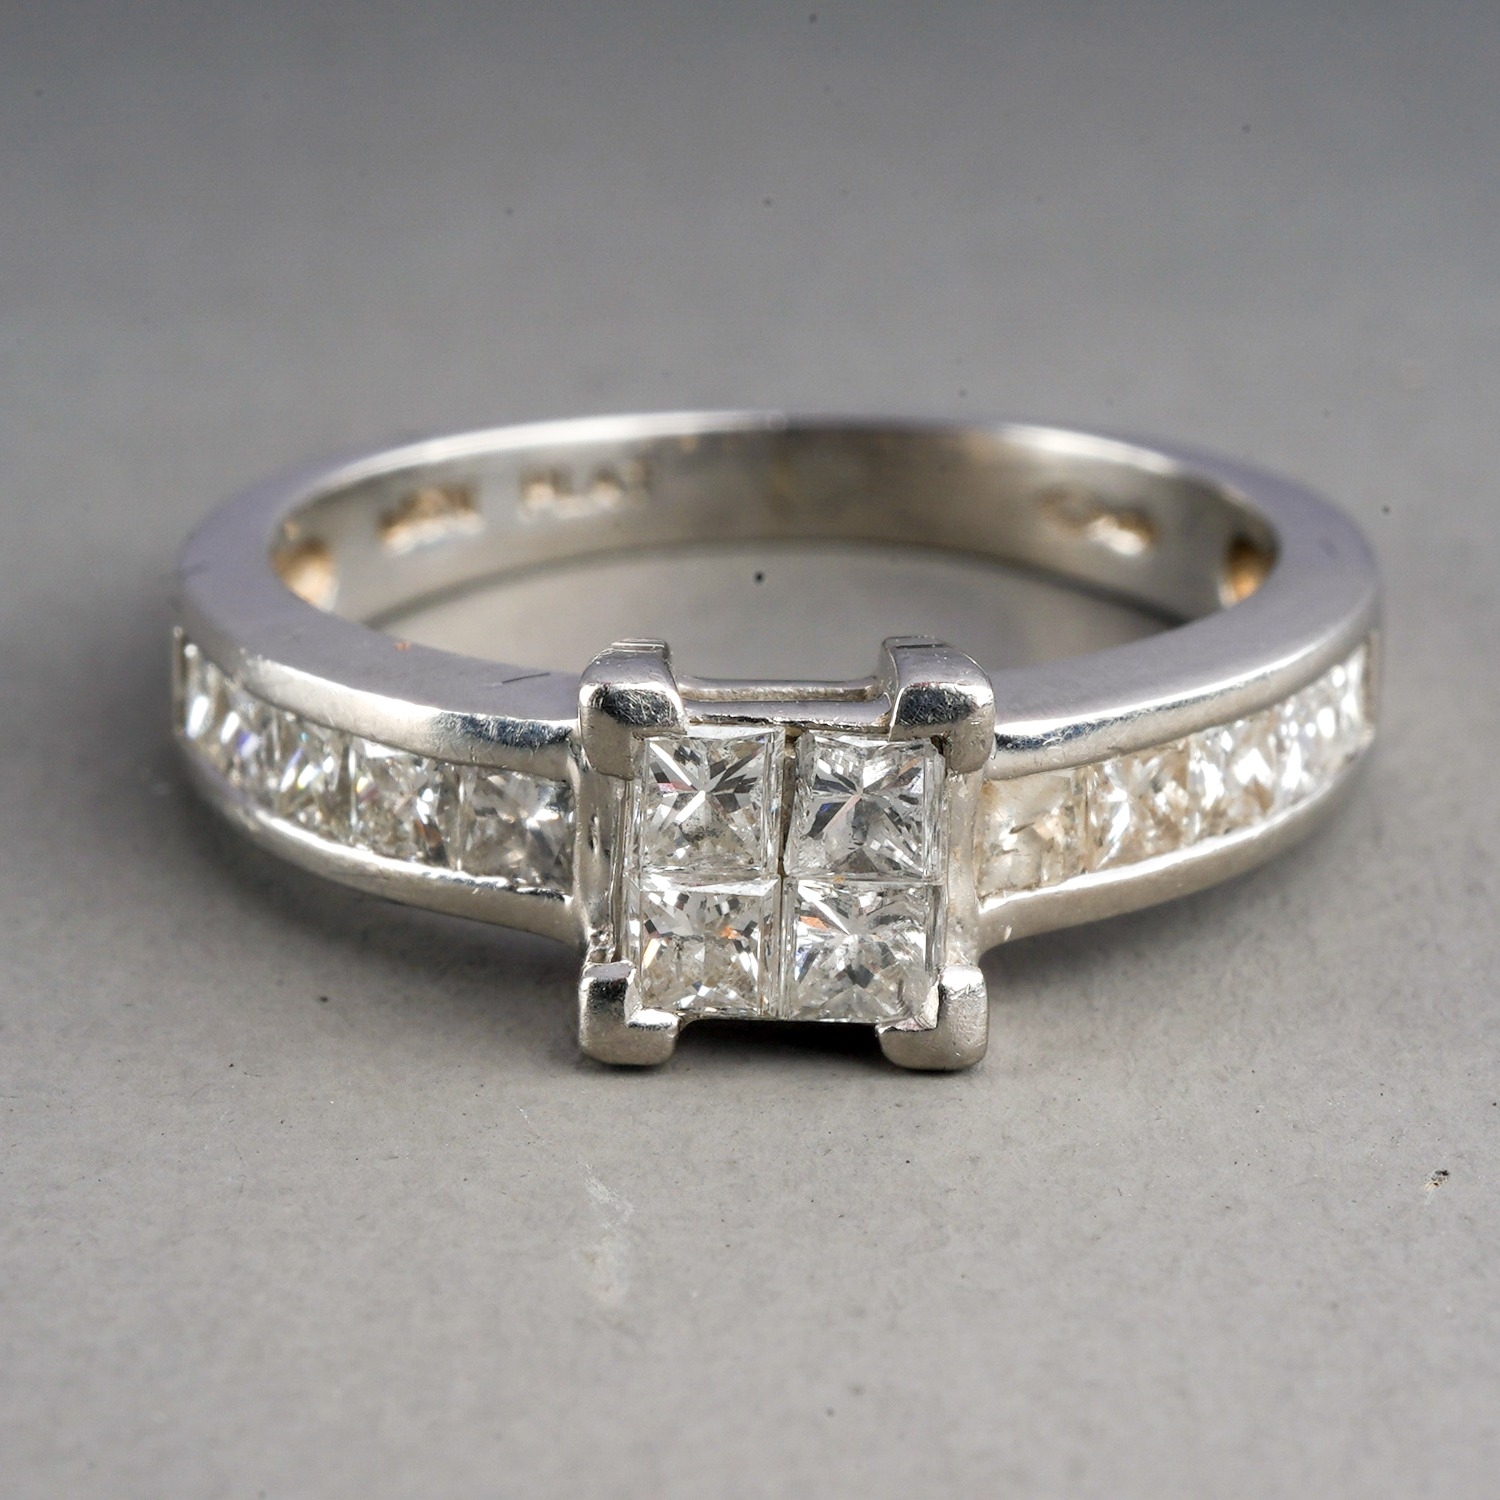 A platinum and diamond ring, set with four princess-cut diamonds in a square settings, set with - Image 2 of 5